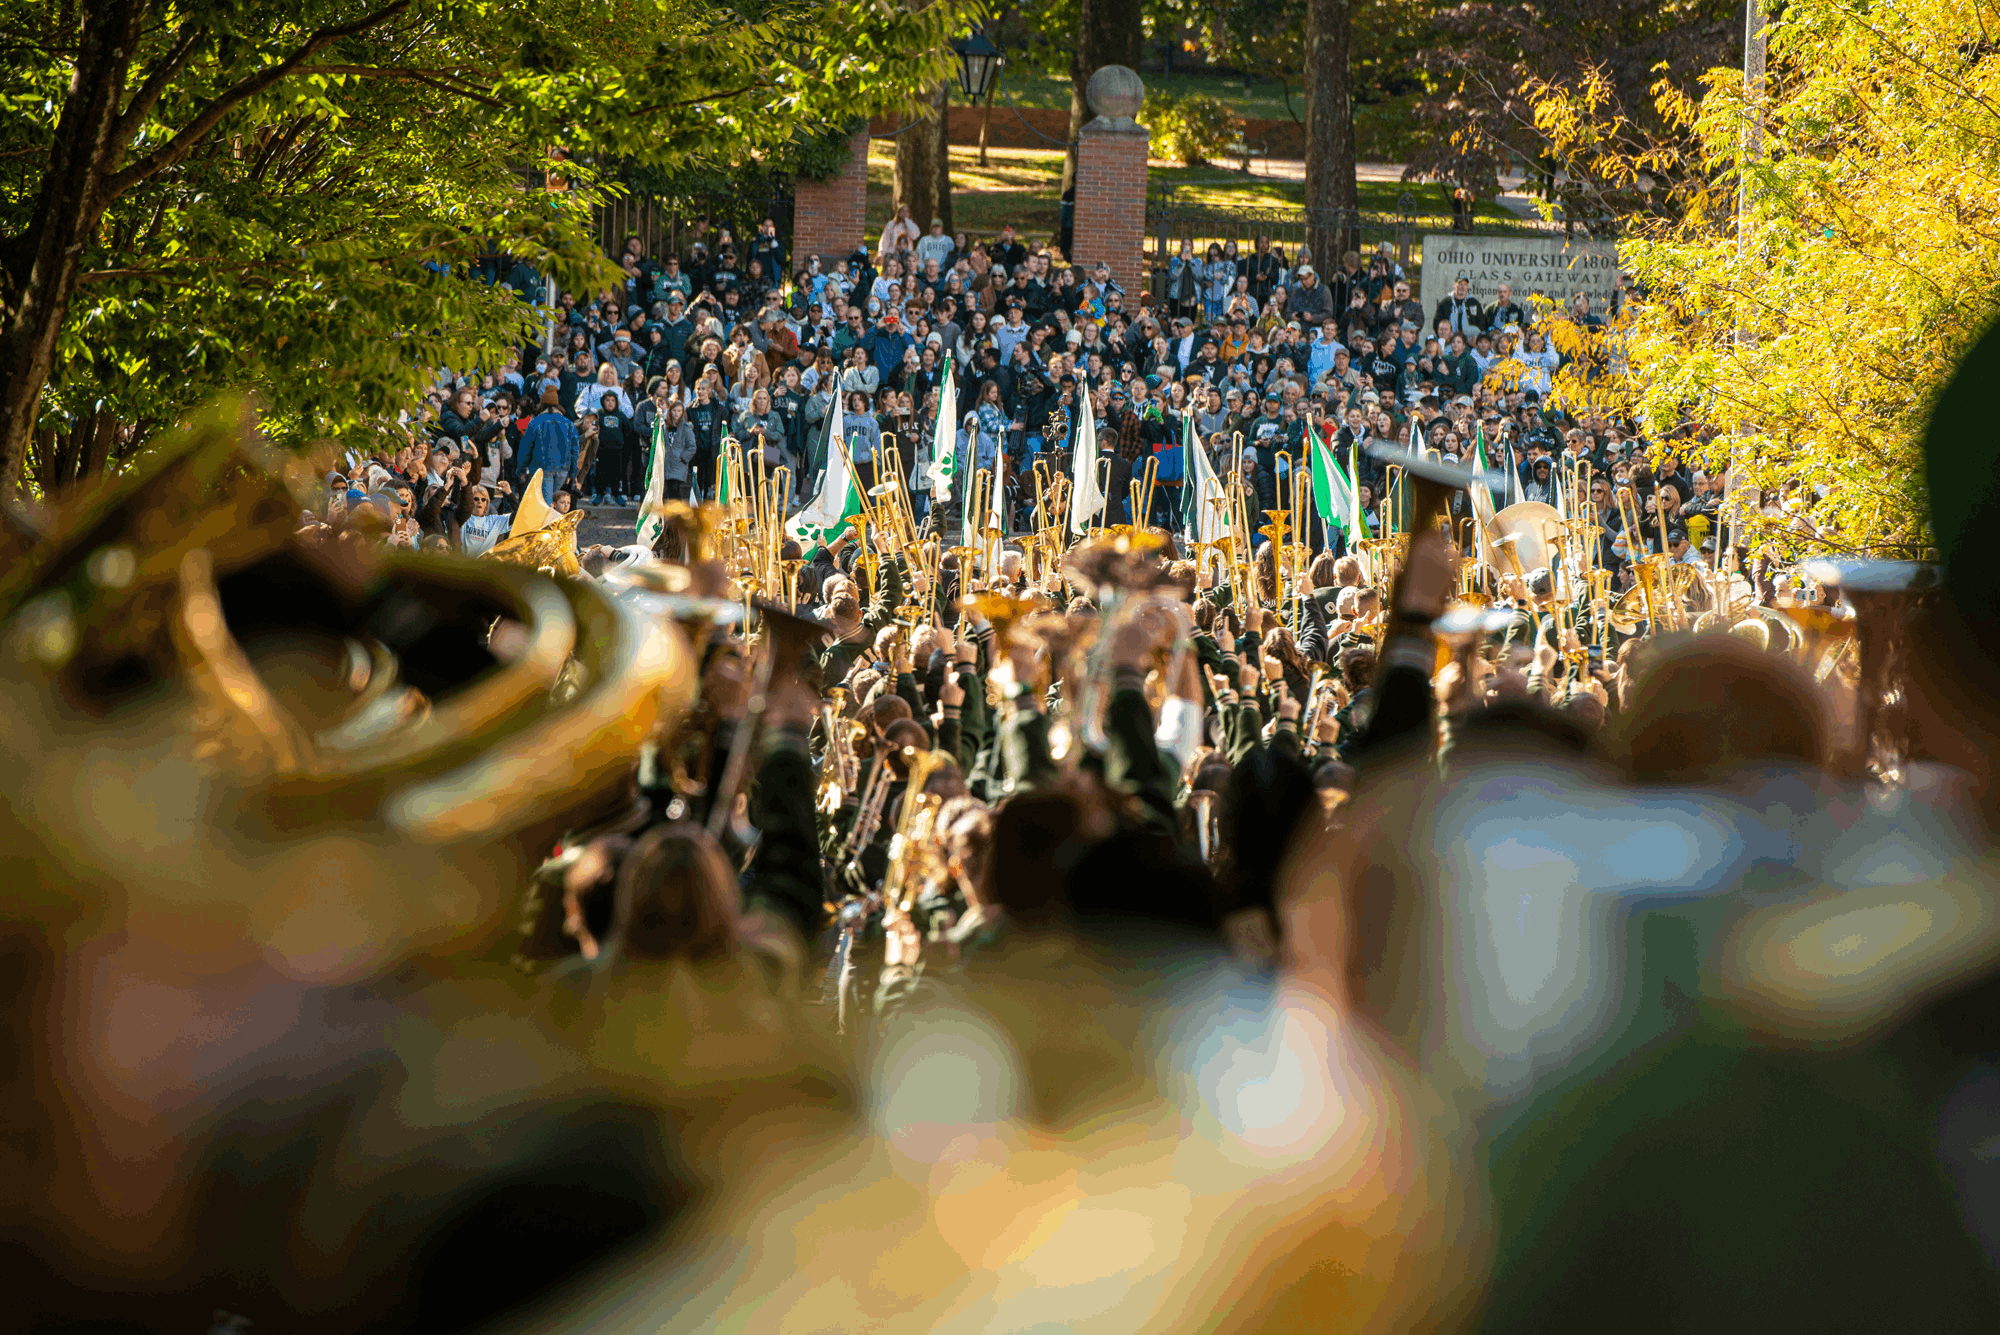 The always-popular Marching 110 Alumni Band makes its way toward an enthusiastic crowd gathered at Ohio University’s Class Gateway.